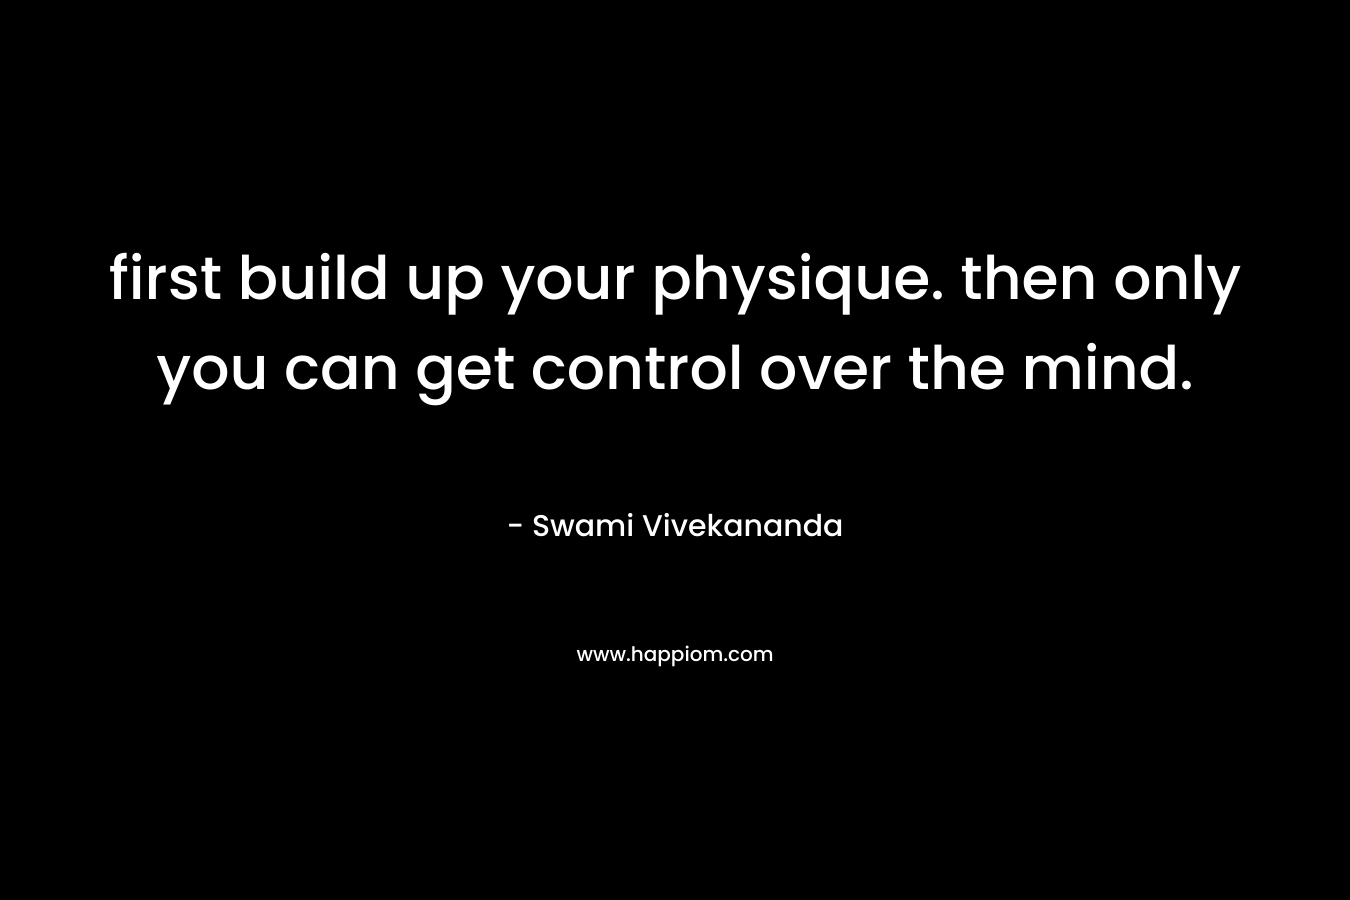 first build up your physique. then only you can get control over the mind.